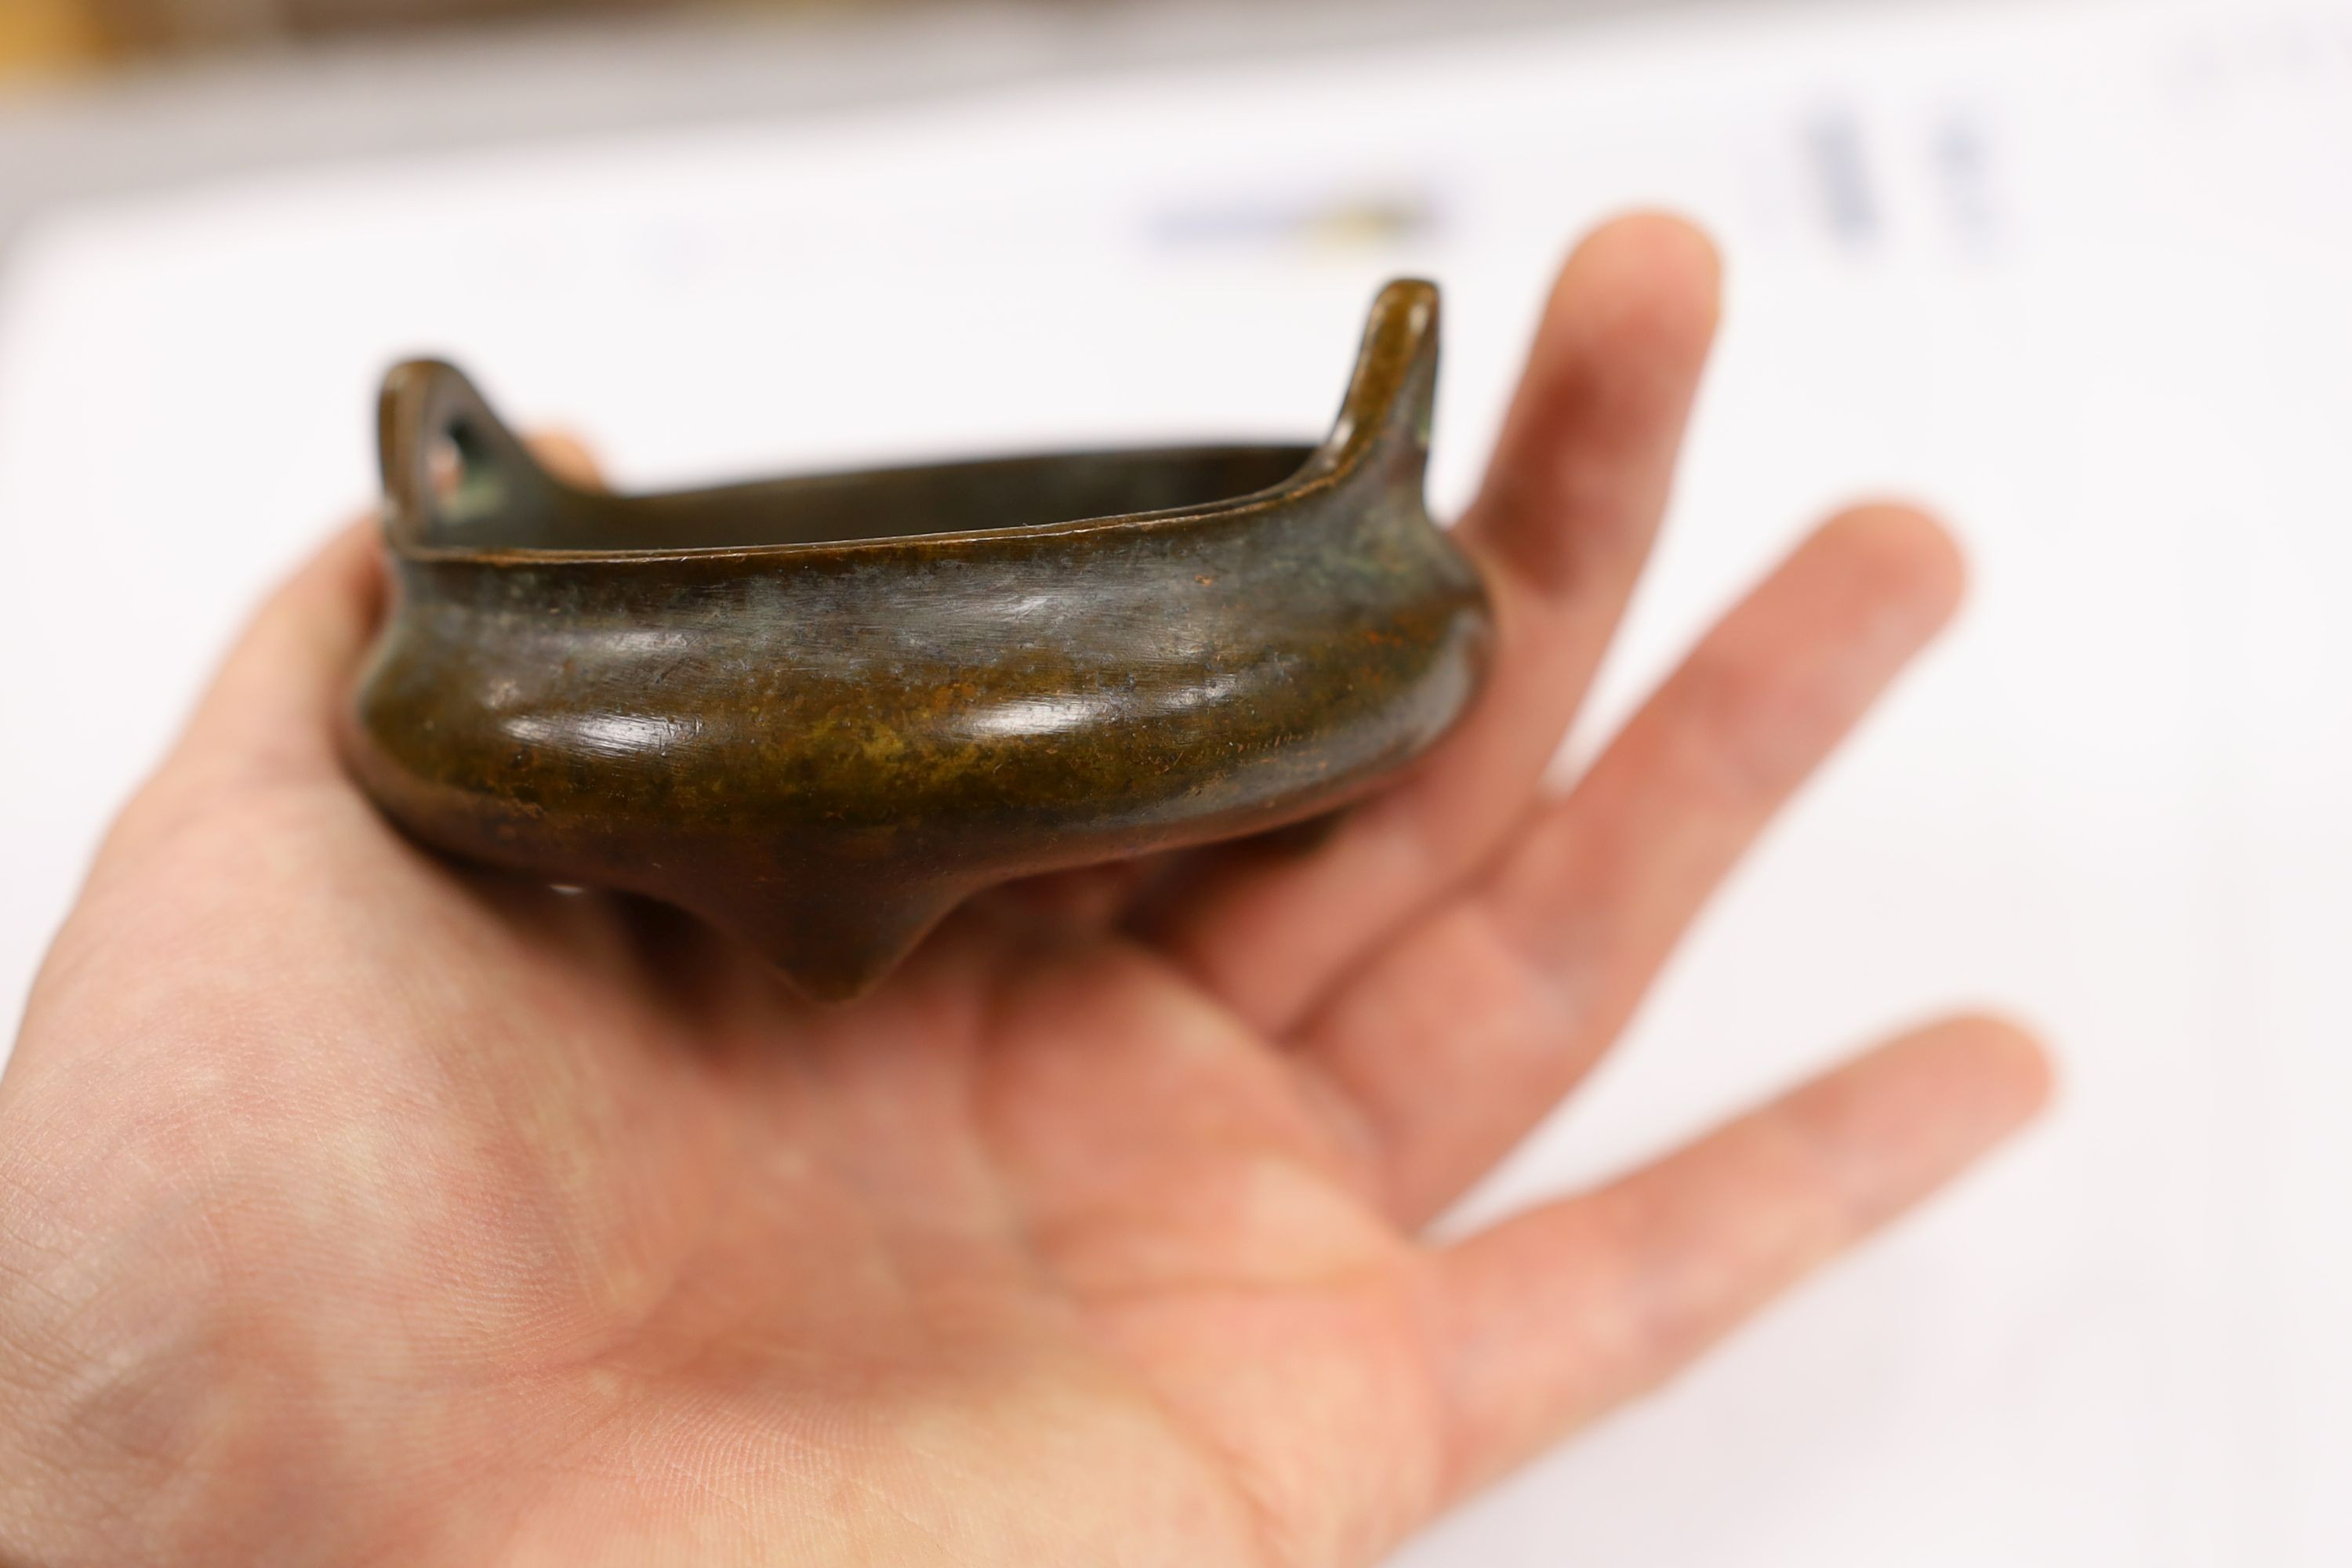 Two Chinese bronze censers, largest 11cms diameter